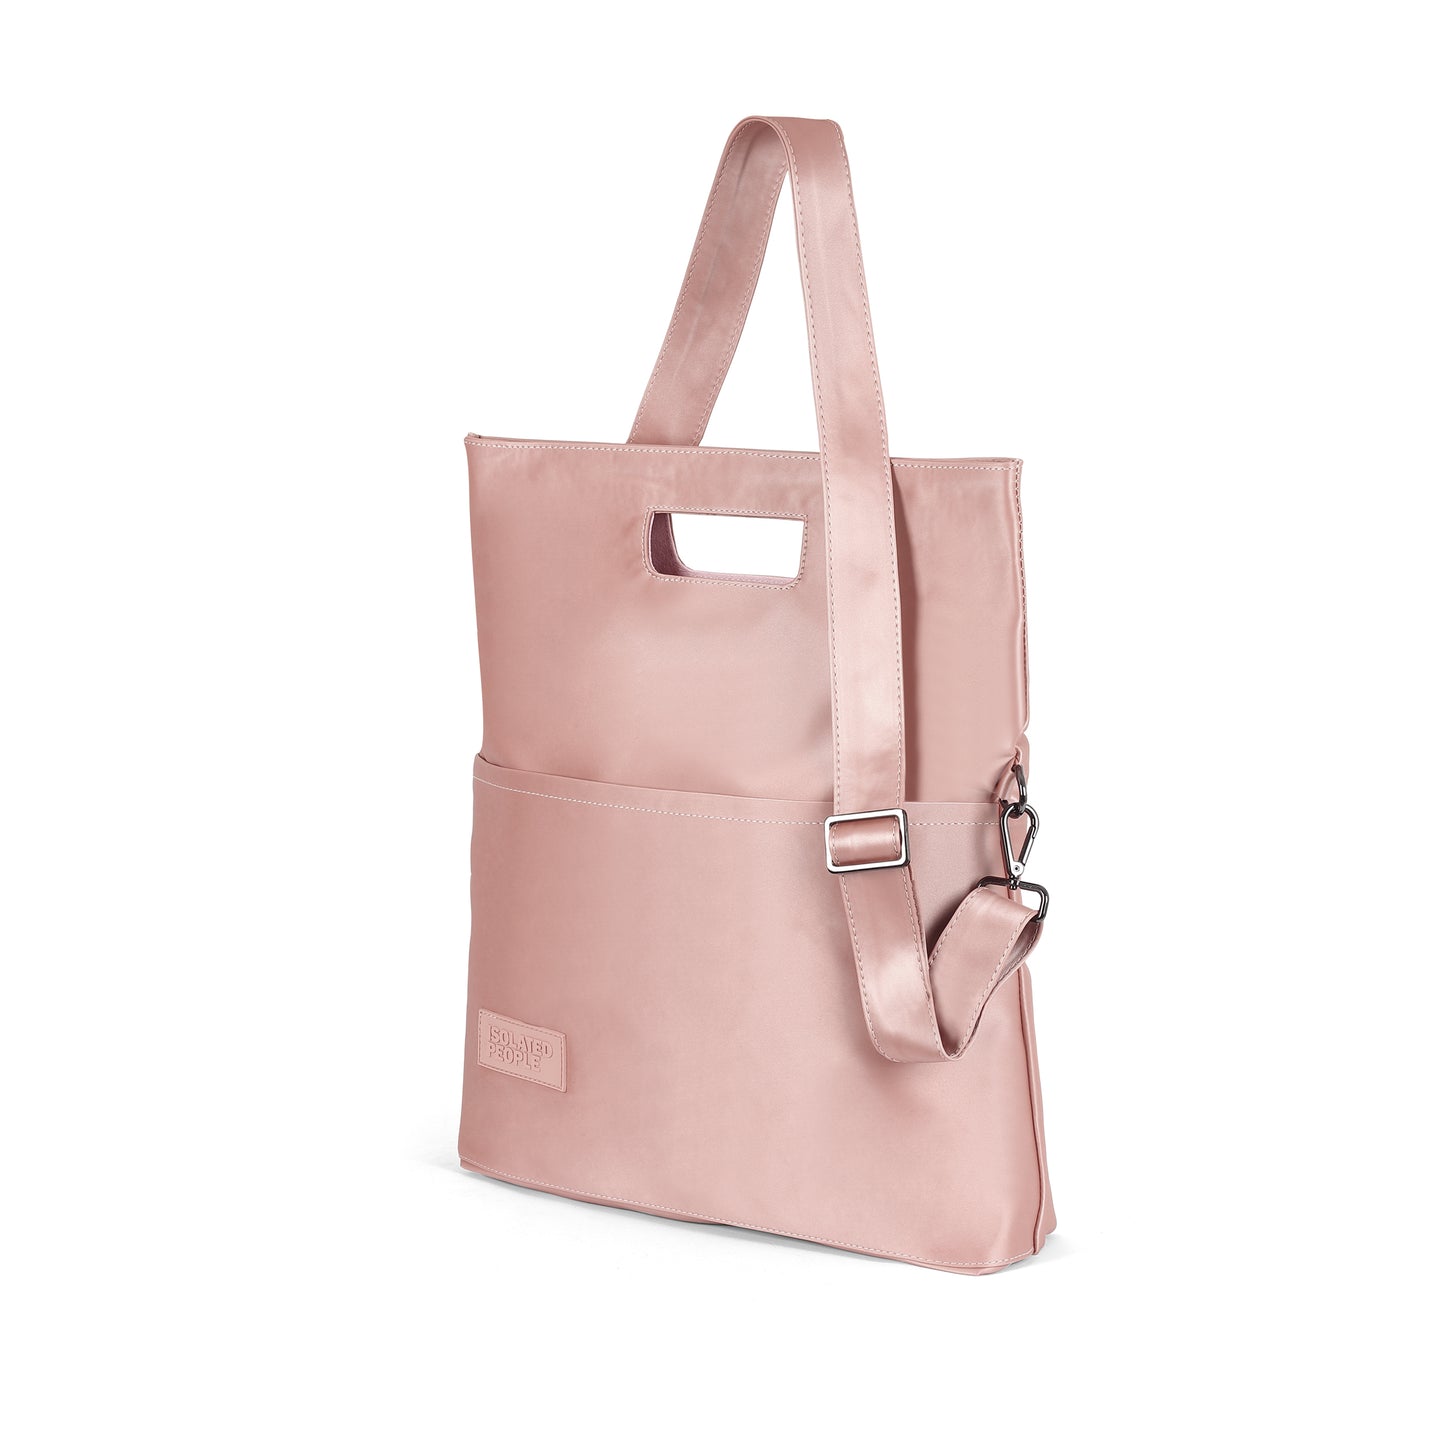 Isolated People Pink Companion City Bag